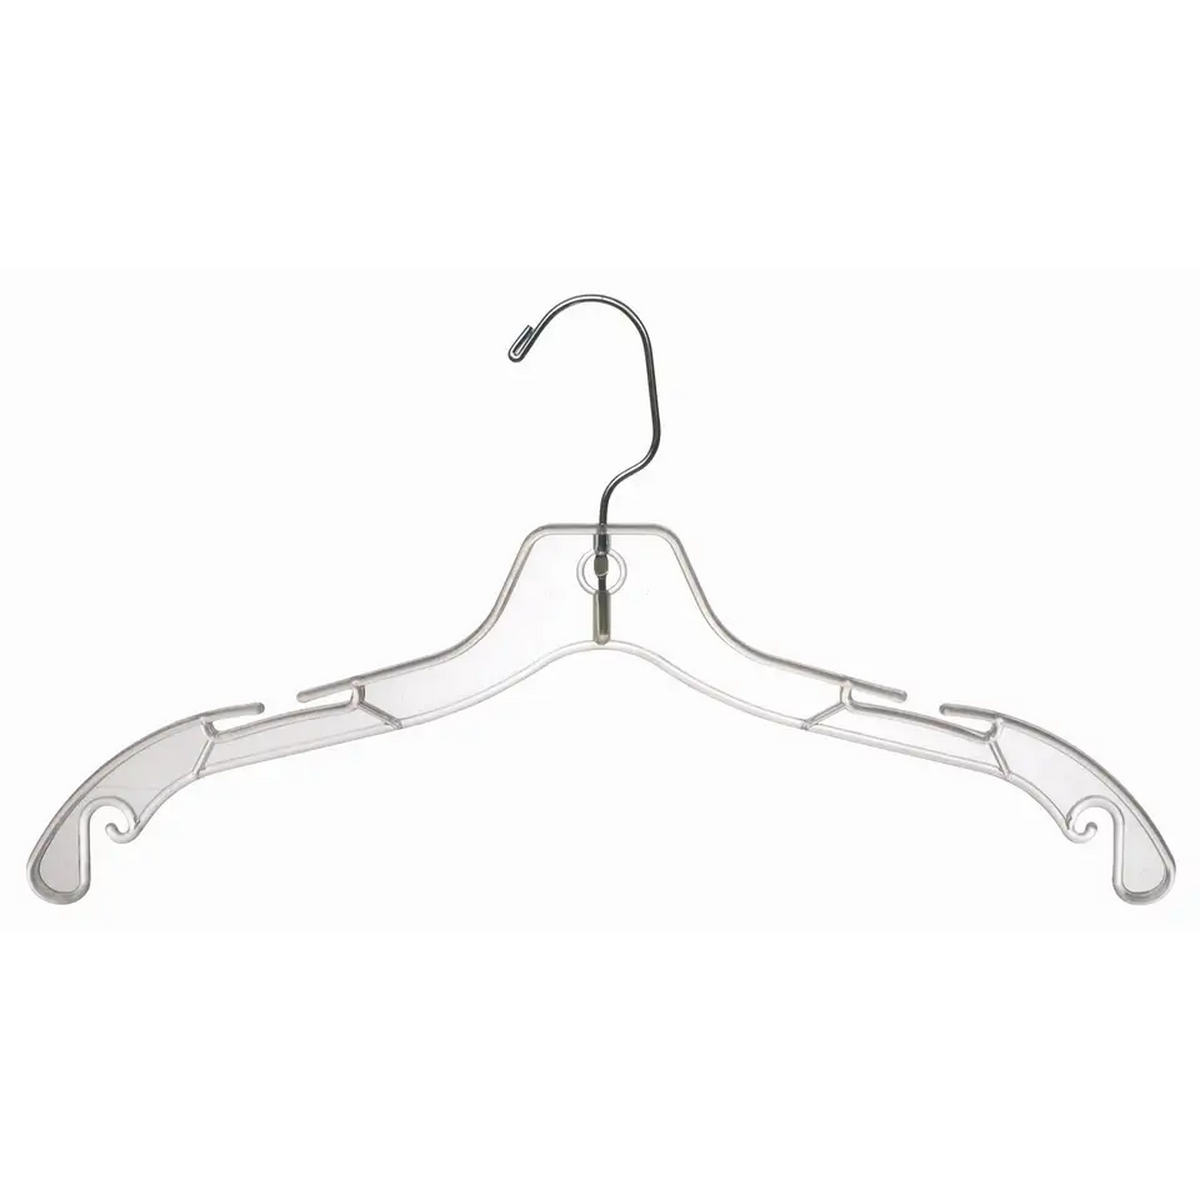 200-Pack WisdomFur Premium Plastic Hangers - Durable Non-Slip, 17 Inches Nickel Plated Hooks, Ideal for Shirts, Coats, Dress, Jumper, Pullovers, Jackets, and Hoodies